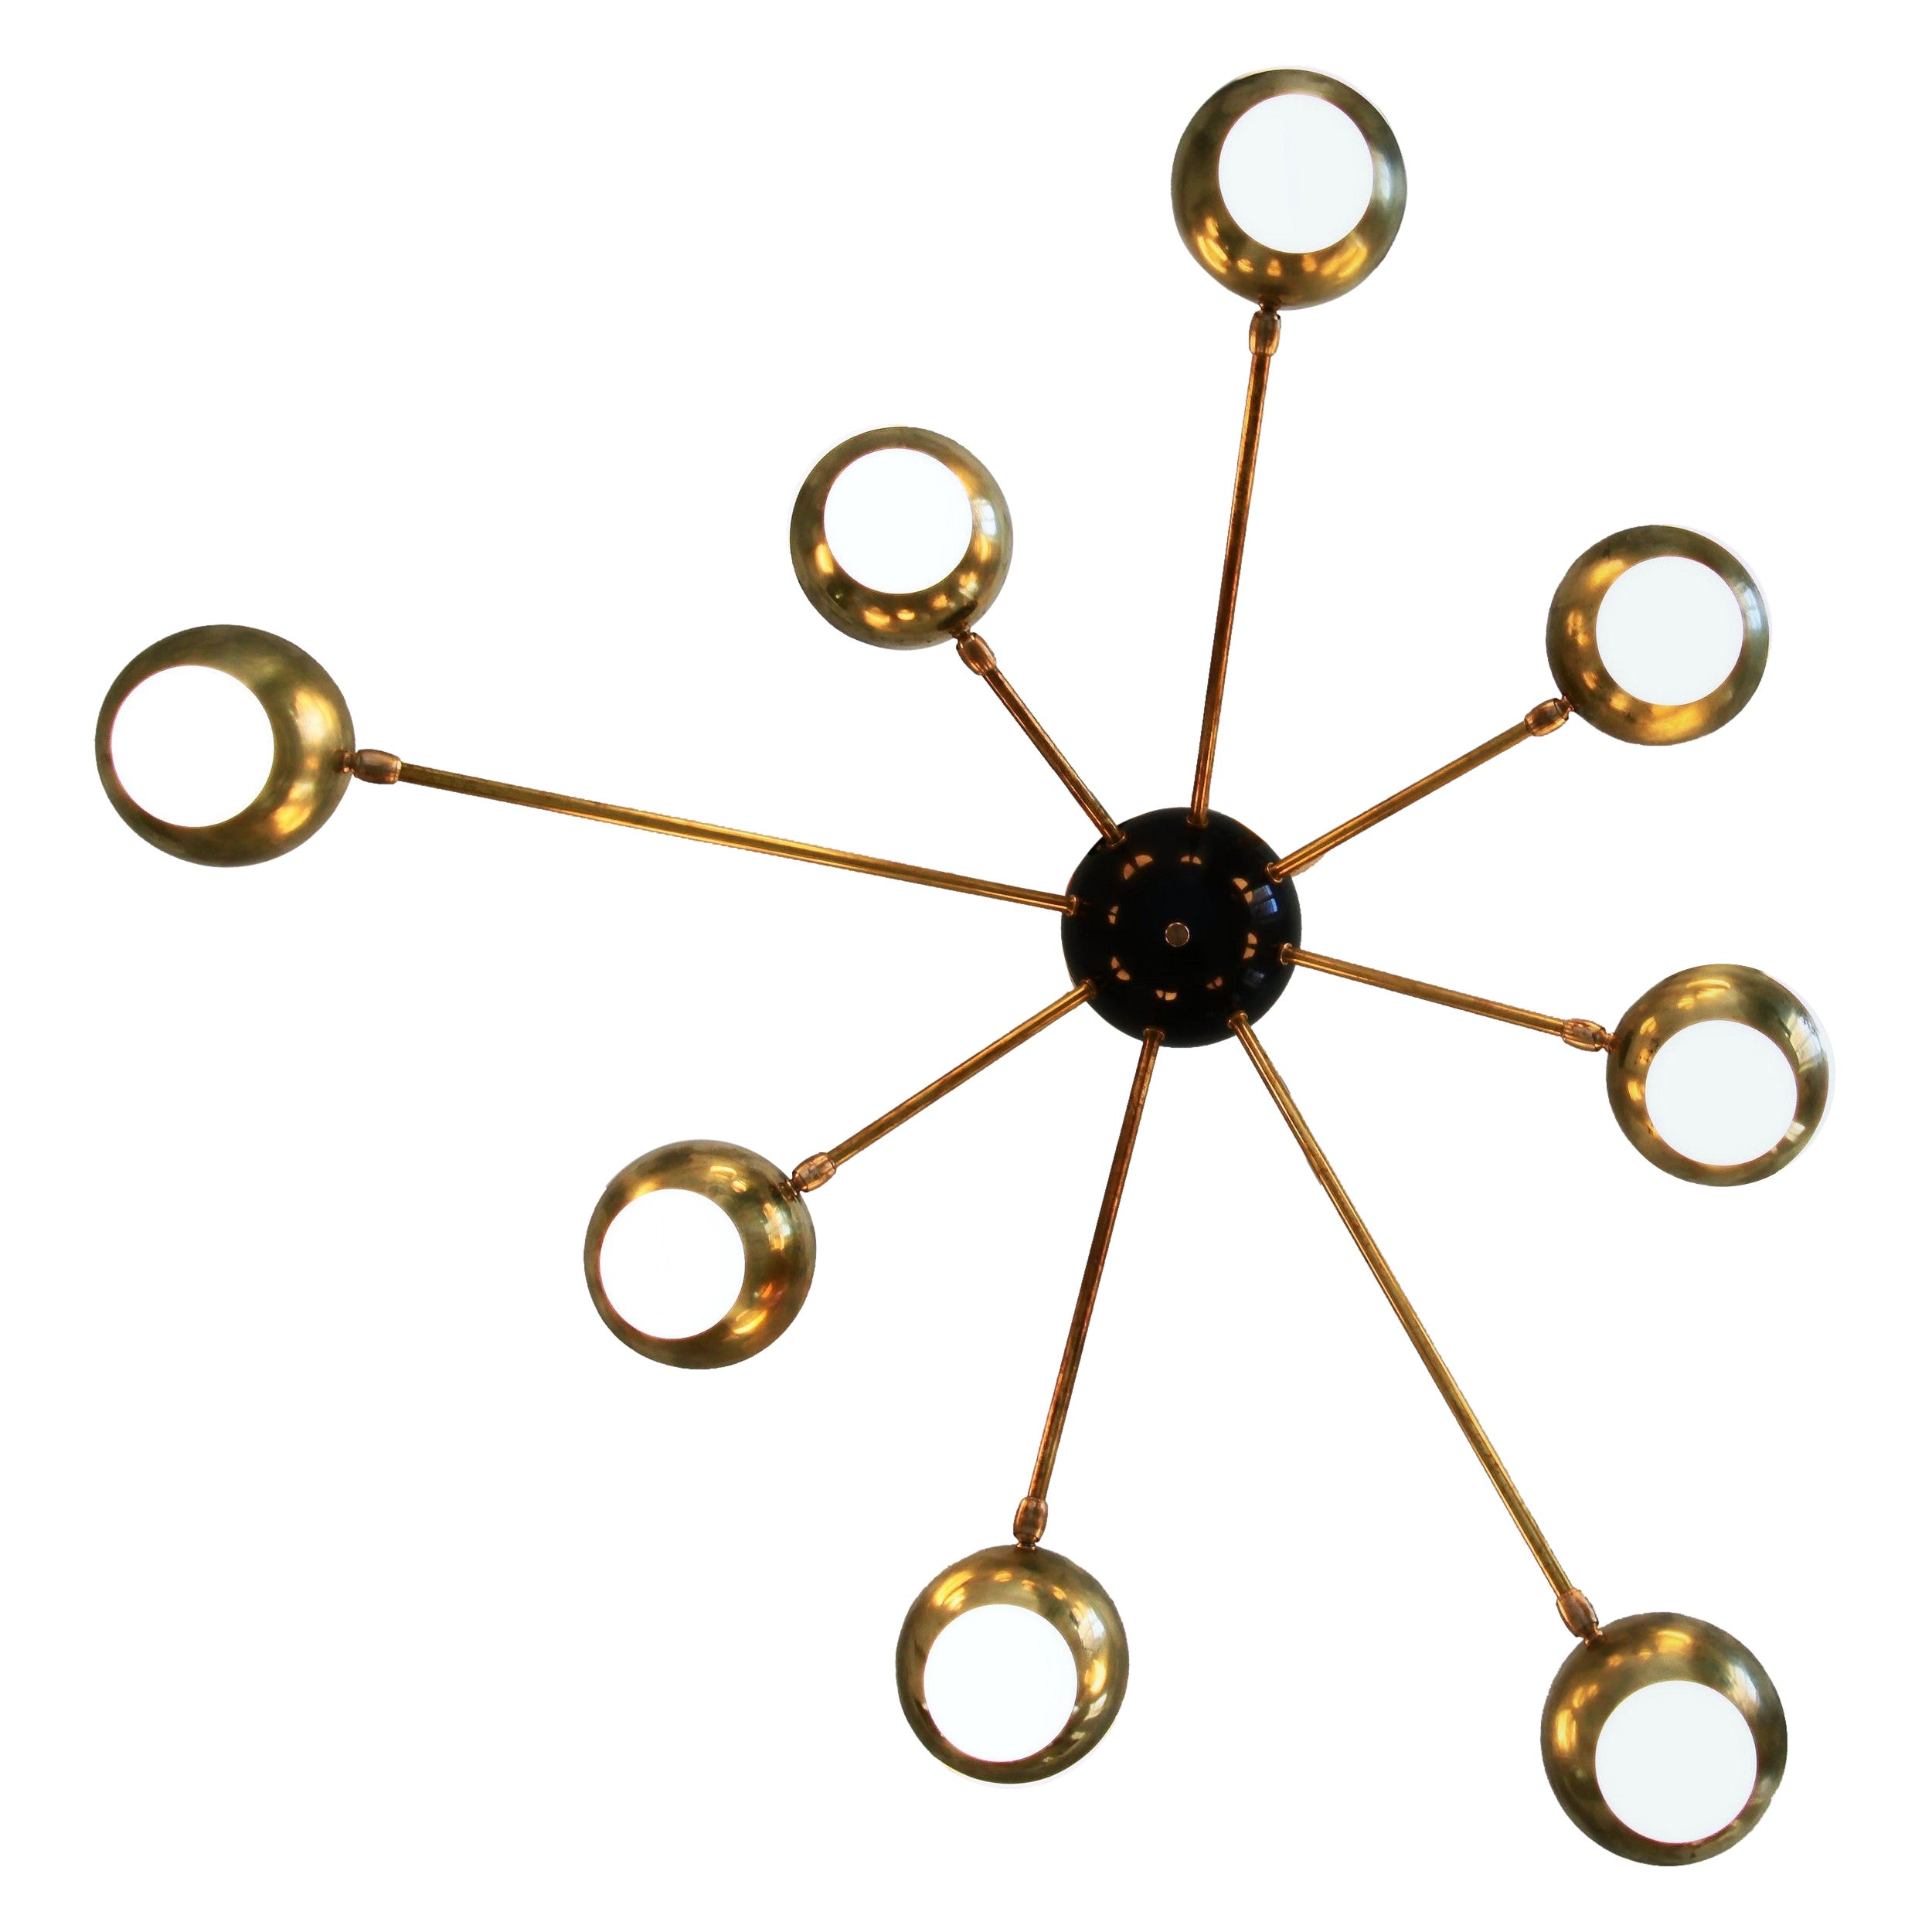 Nido, Flush Mount Brass and Glass Chandelier 8 Arms, Low Ceiling Best, Free Ship